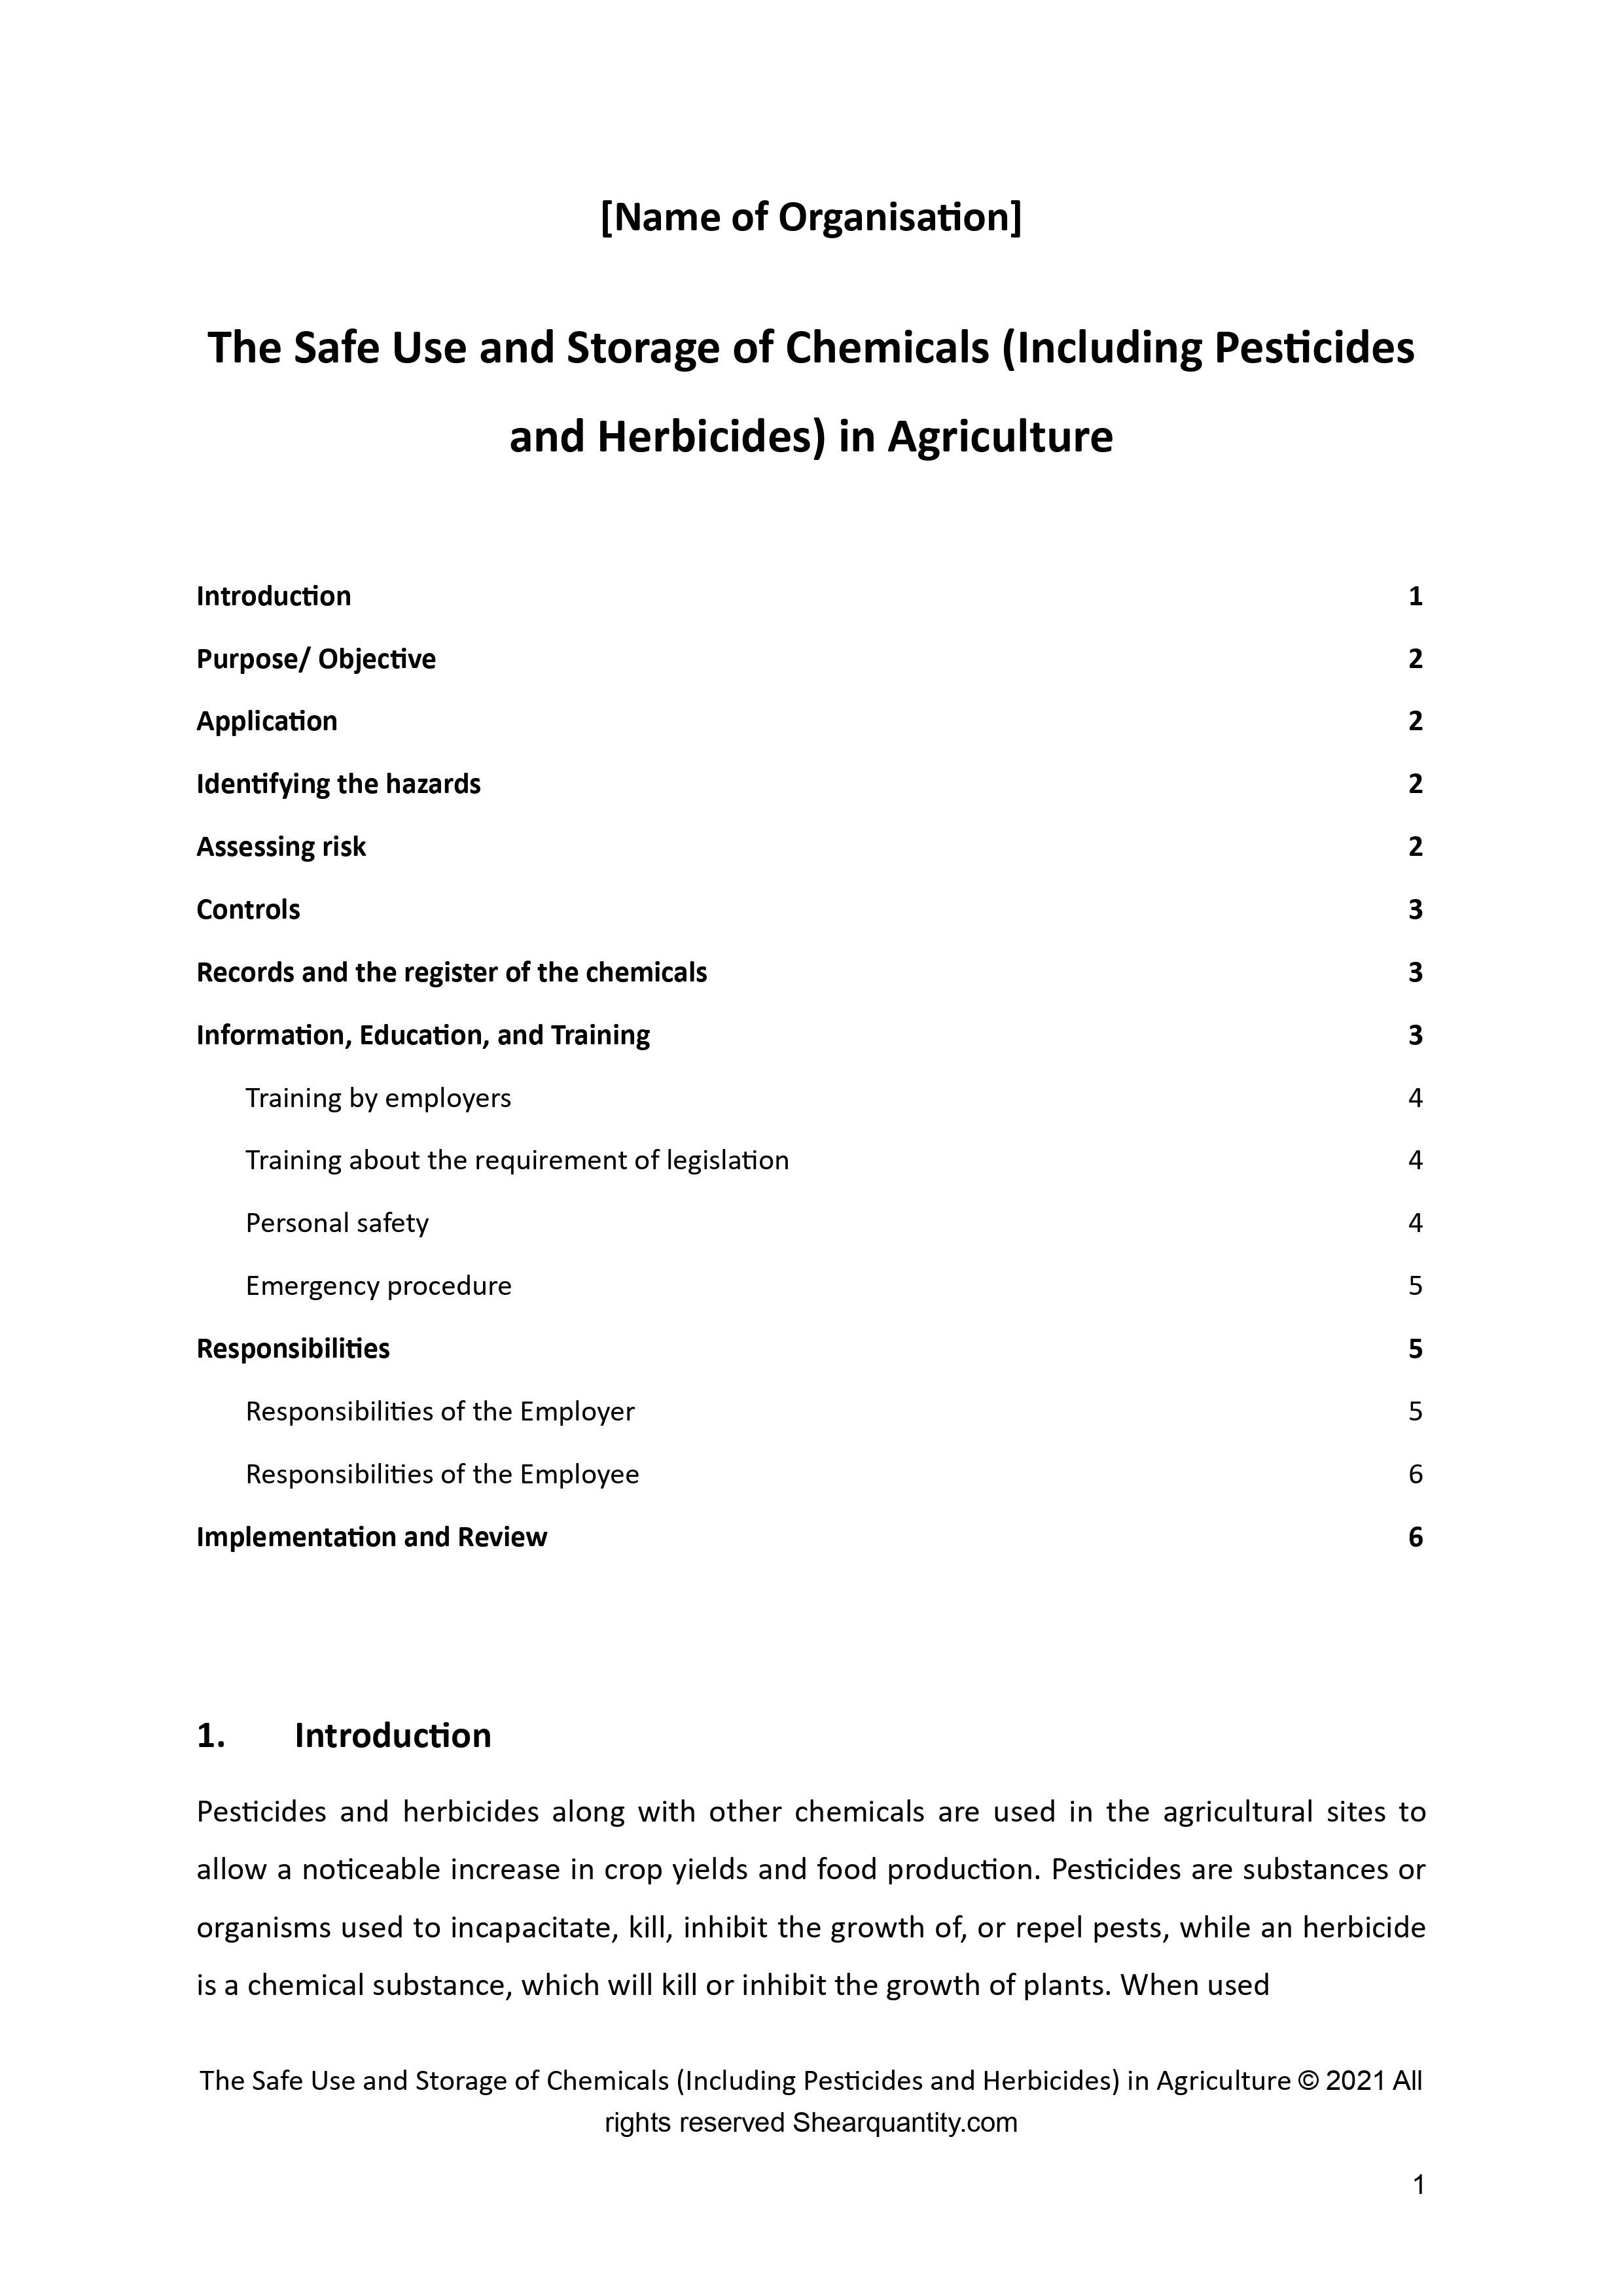 The Safe Use and Storage of Chemicals in Agriculture